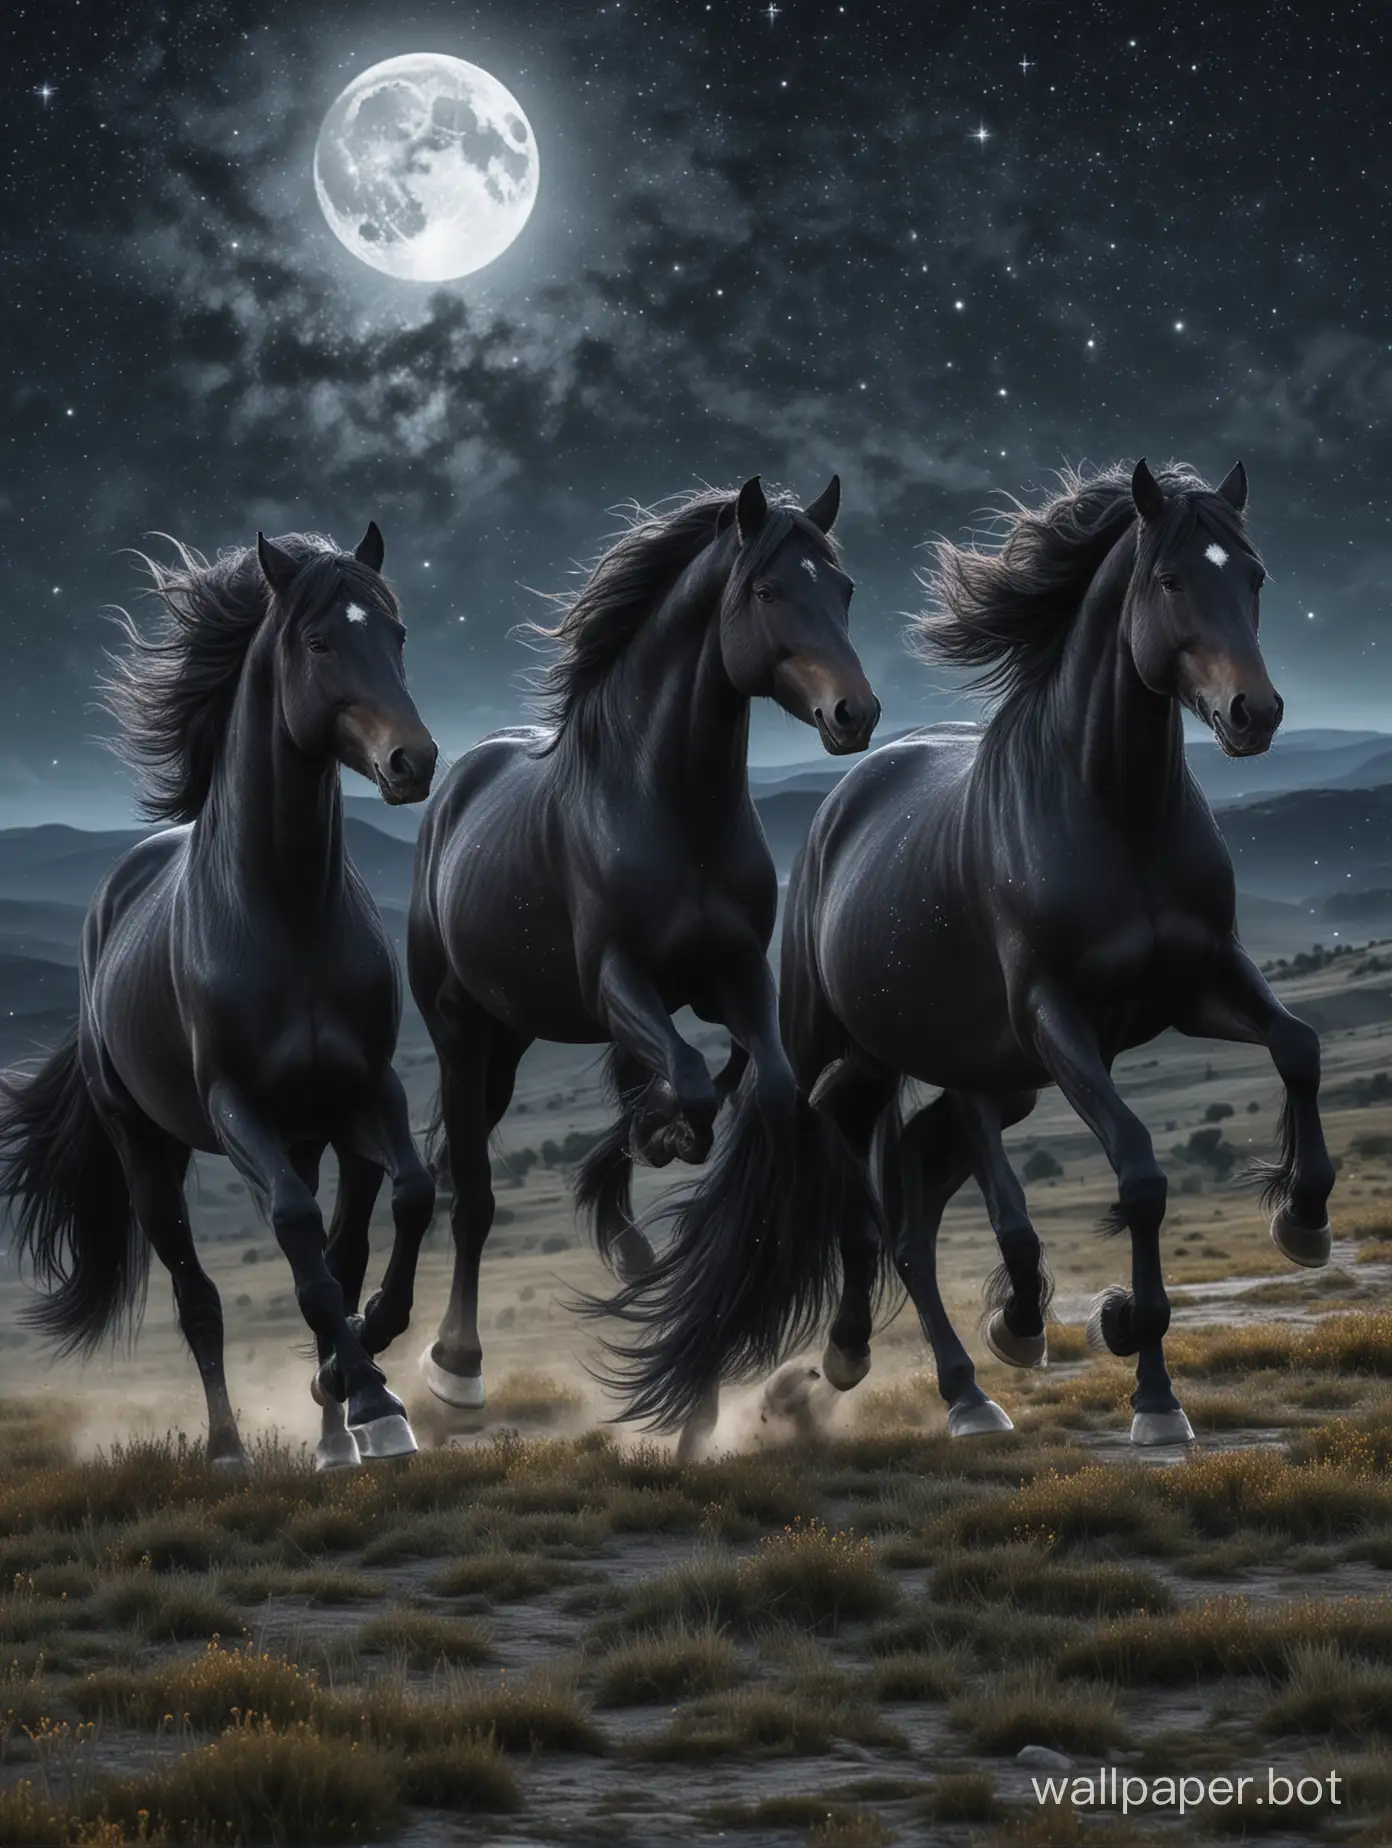 Three black horses with luscious long hair galloping in the moonlit night sky brightened by the shining stars with hills in the distance through a side view